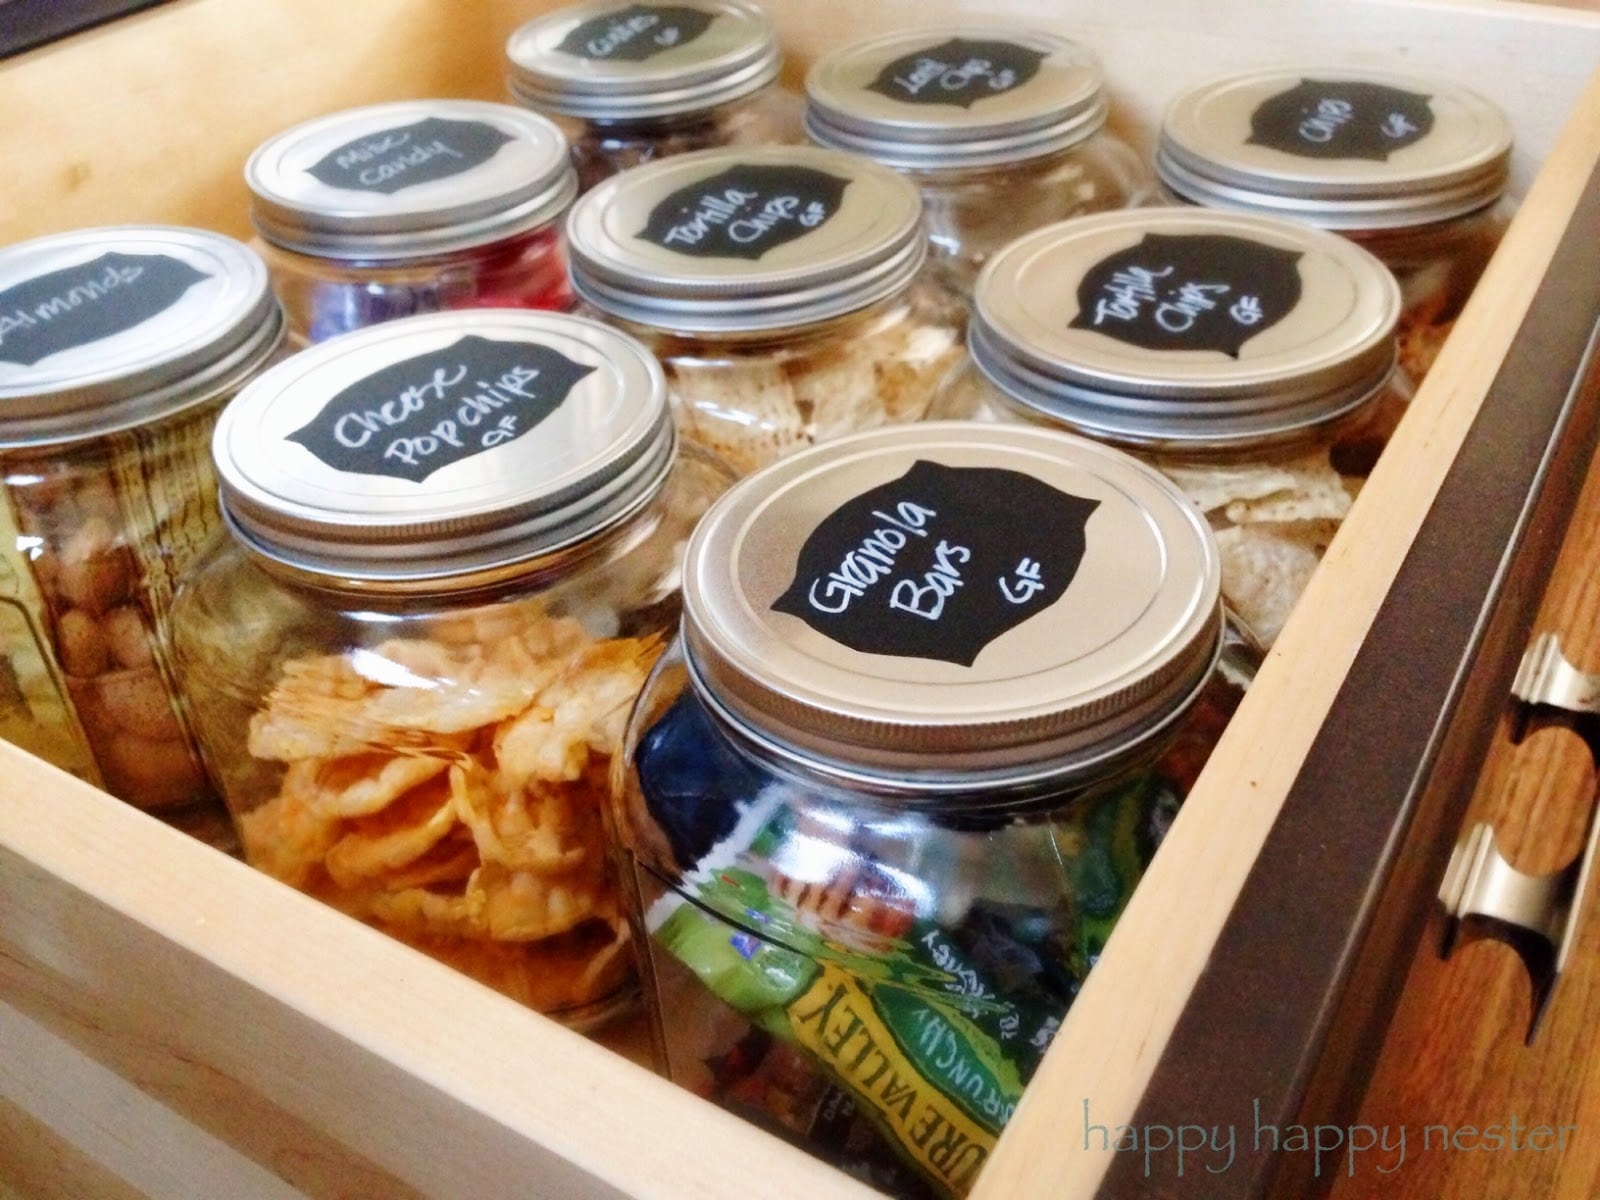 9 Tips For Kitchen Organization made easy. Follow these tried and true steps, your kitchen will be thoroughly organized. A well-organized kitchen is great. Place your snacks in big glass jars along with labels and your family will thanks you! #organizing